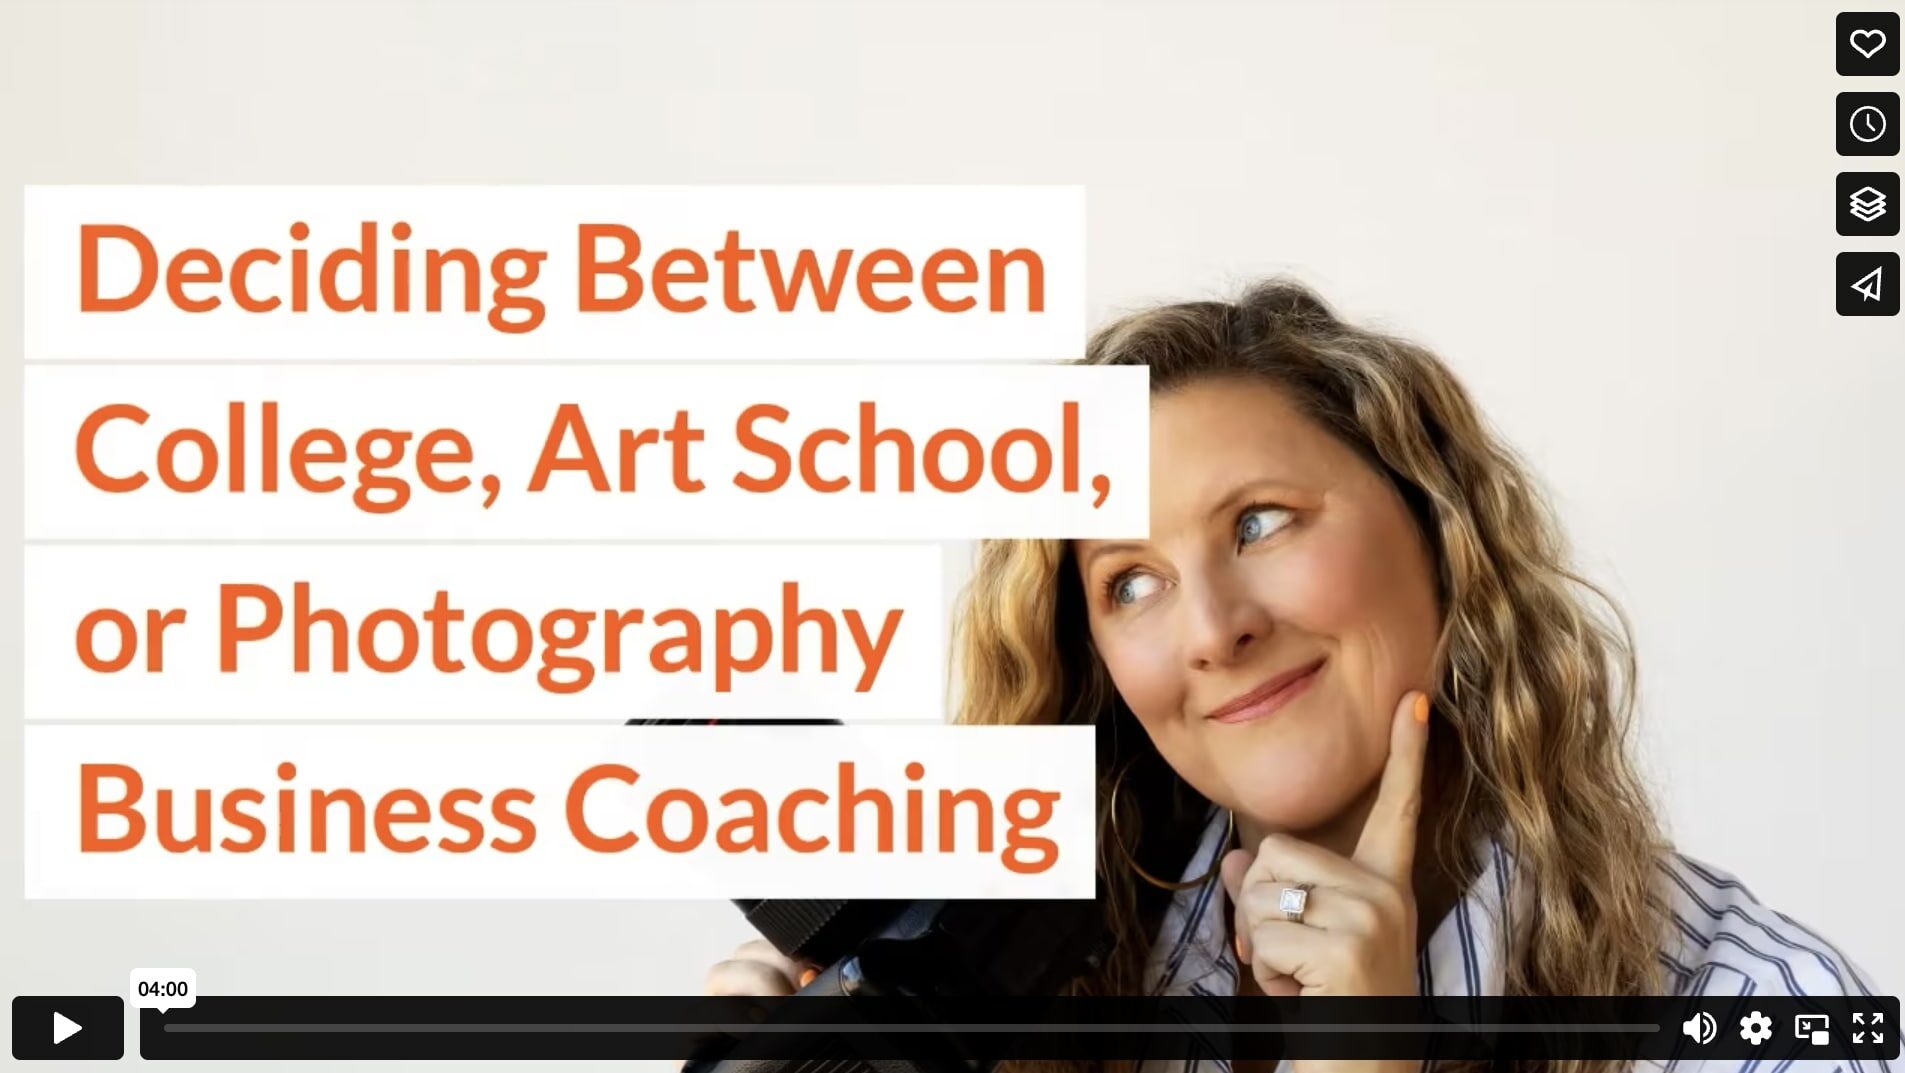 Deciding Between College, Art School, or Photography Business Coaching